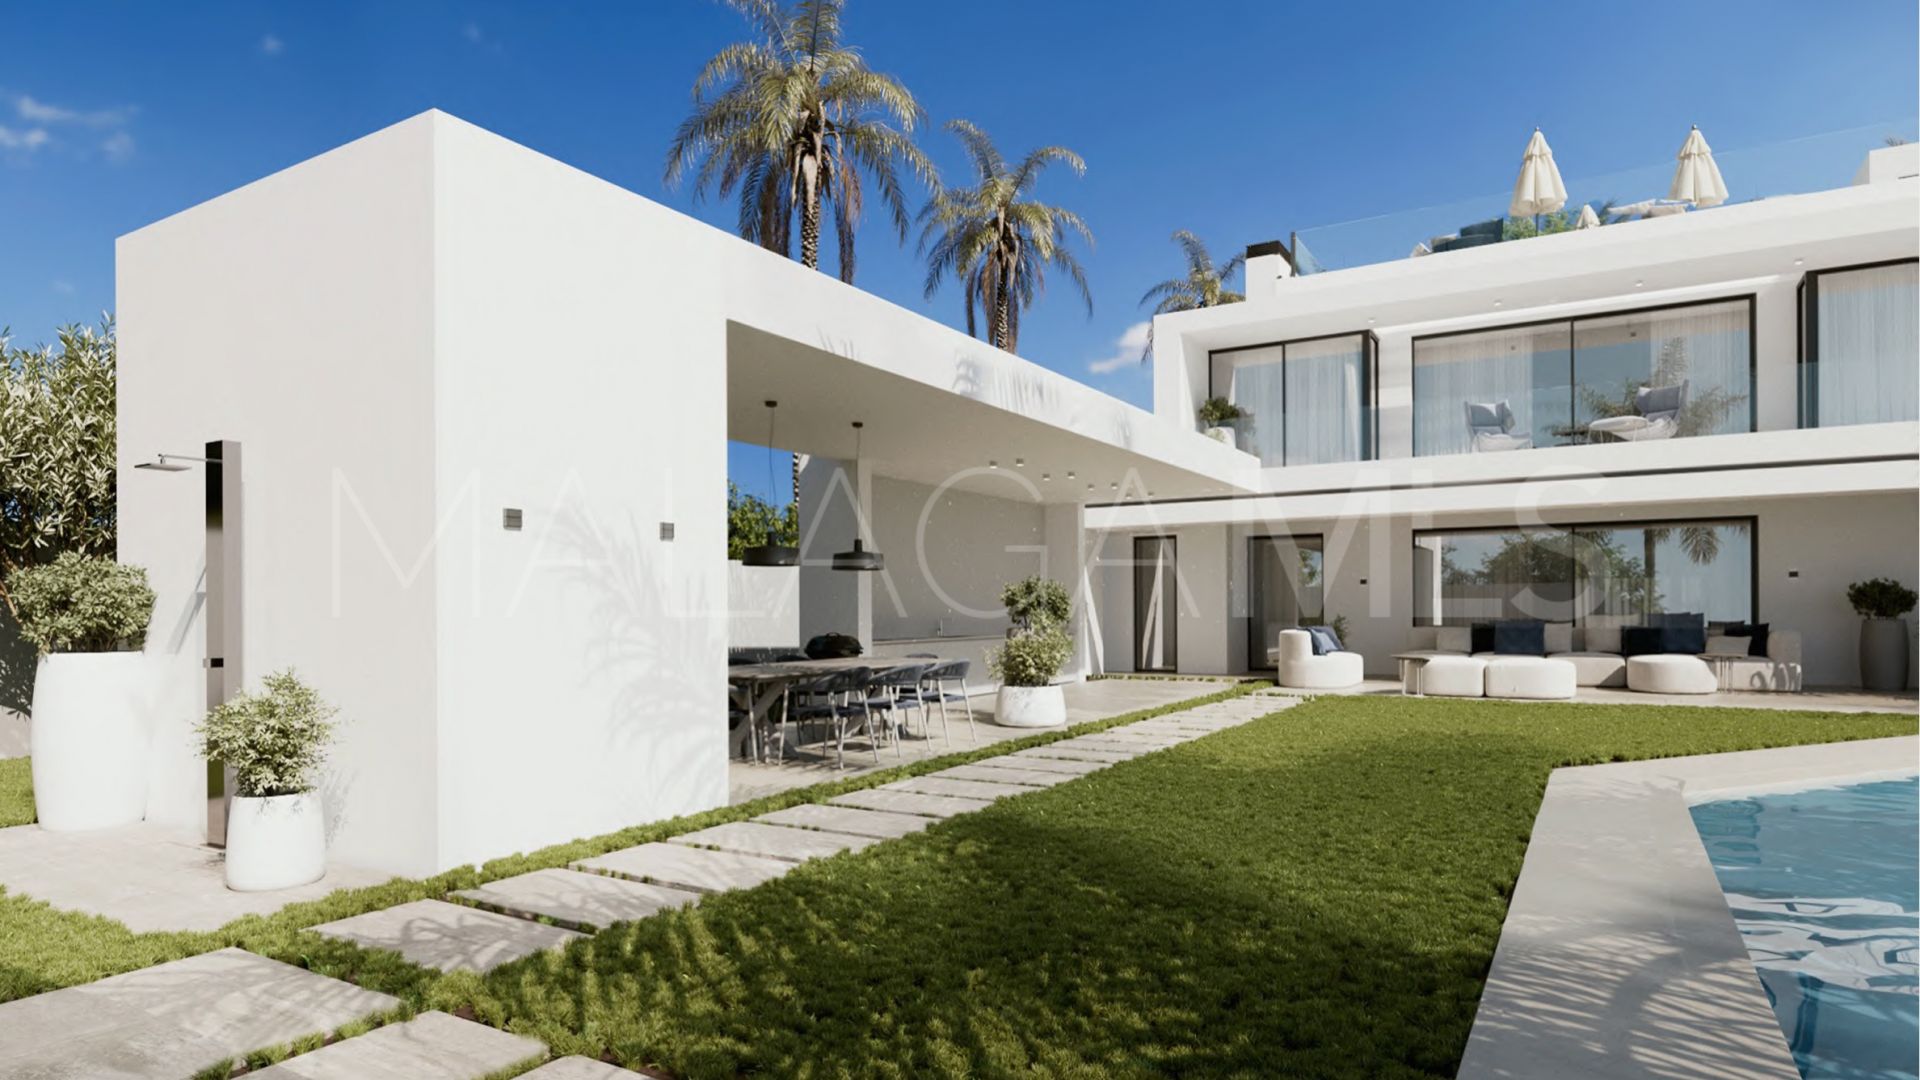 Villa for sale in Marbella with 6 bedrooms